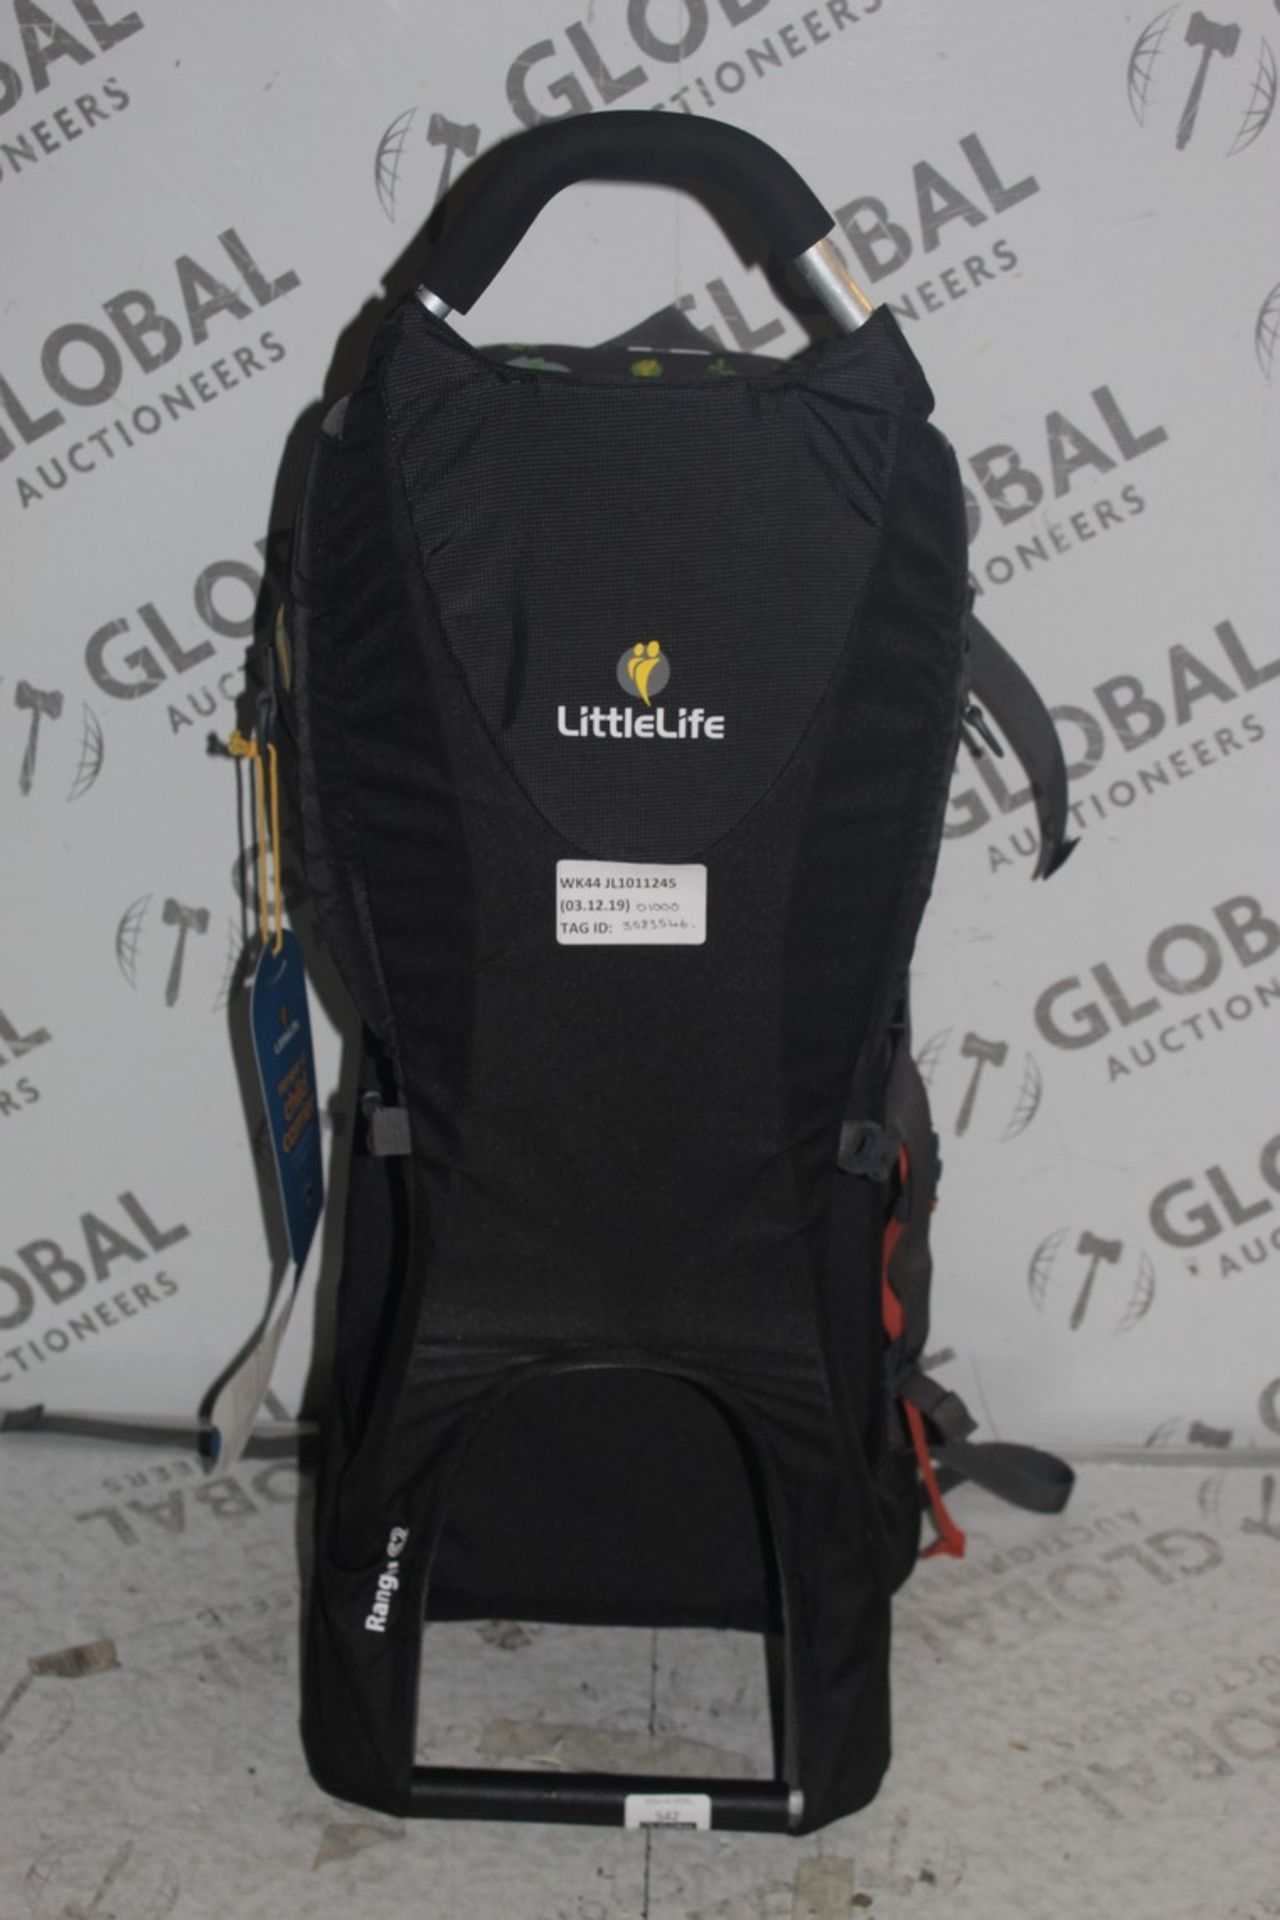 Little Life Ranger S2 Child Carrier RRP £100 (3583546) (Public Viewing and Appraisals Available)